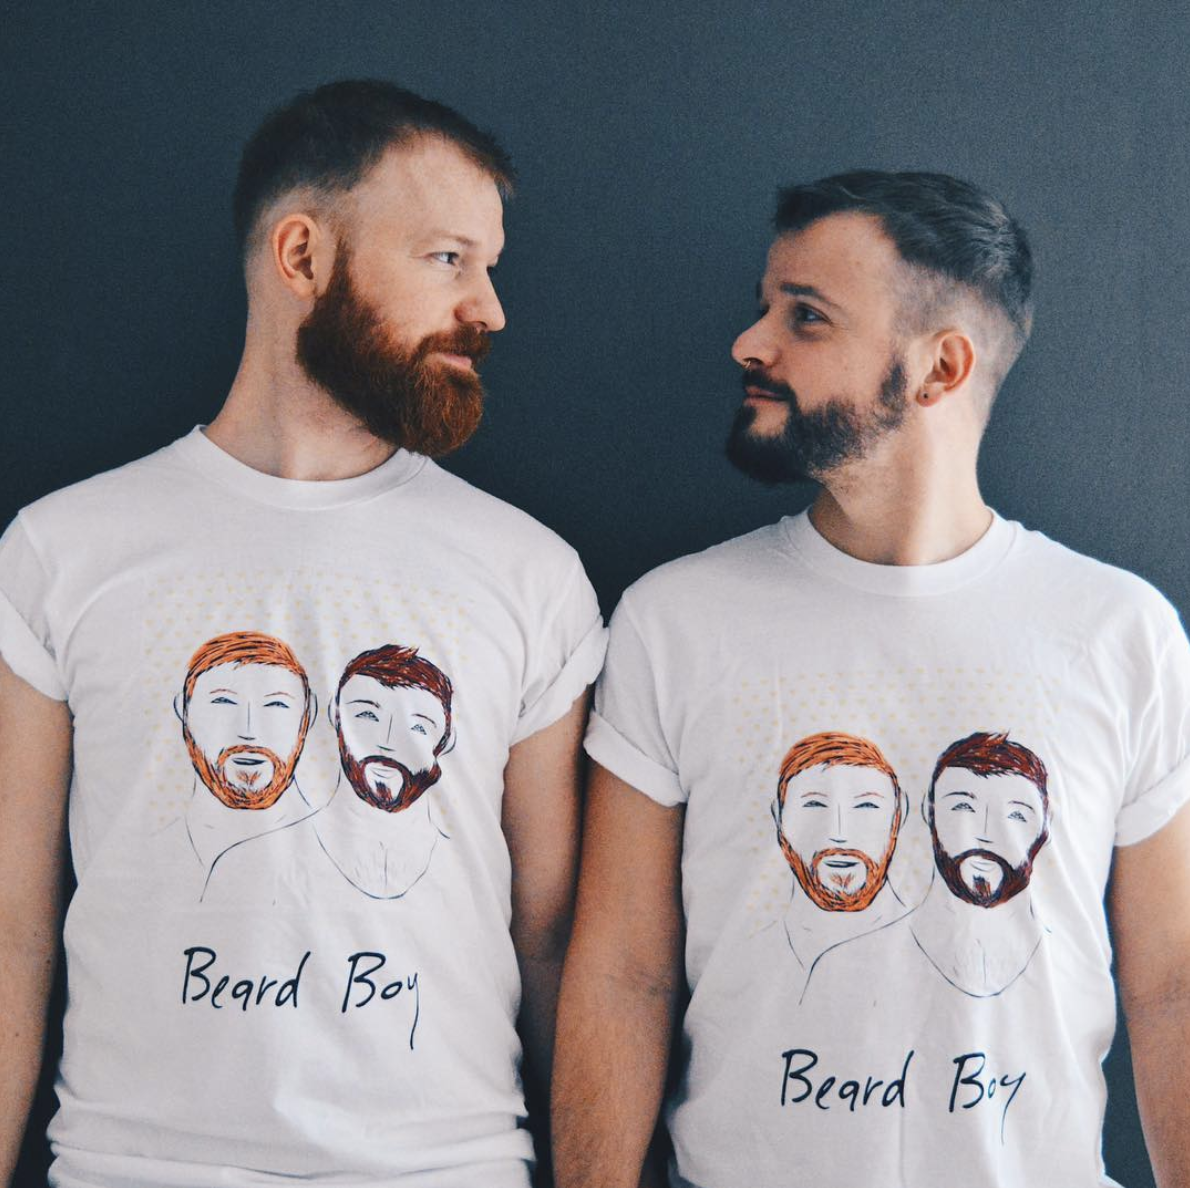 Wearing Beard Boy's Gay ArtWork on our shirtsy Gay Artwork on Instagram: our favorite art pieces of Couple of Men